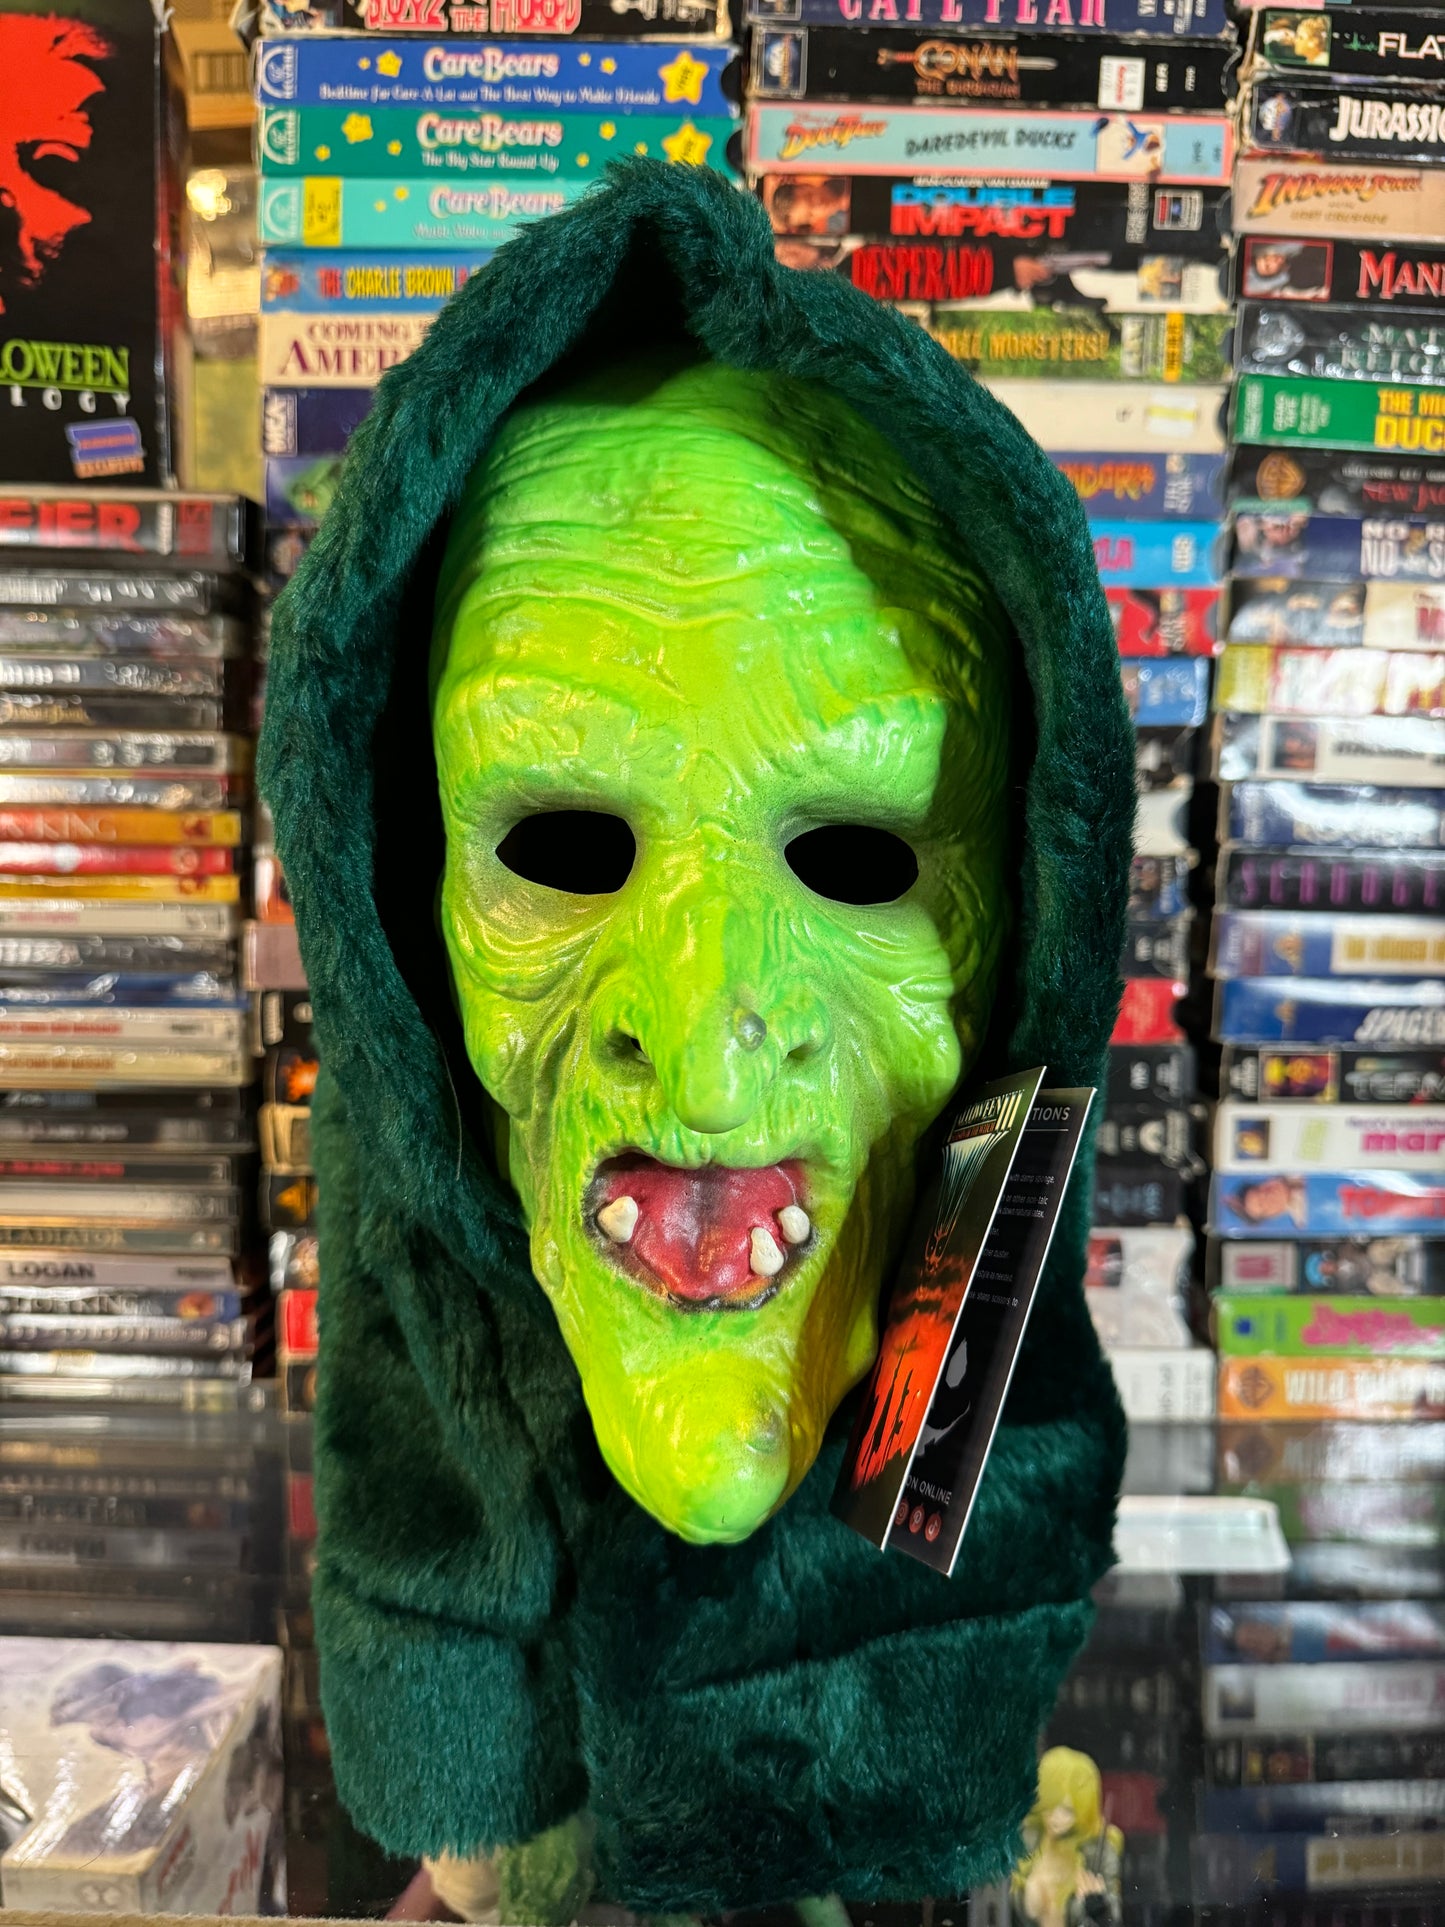 HALLOWEEN III SEASON OF THE WITCH - GLOW IN THE DARK WITCH MASK